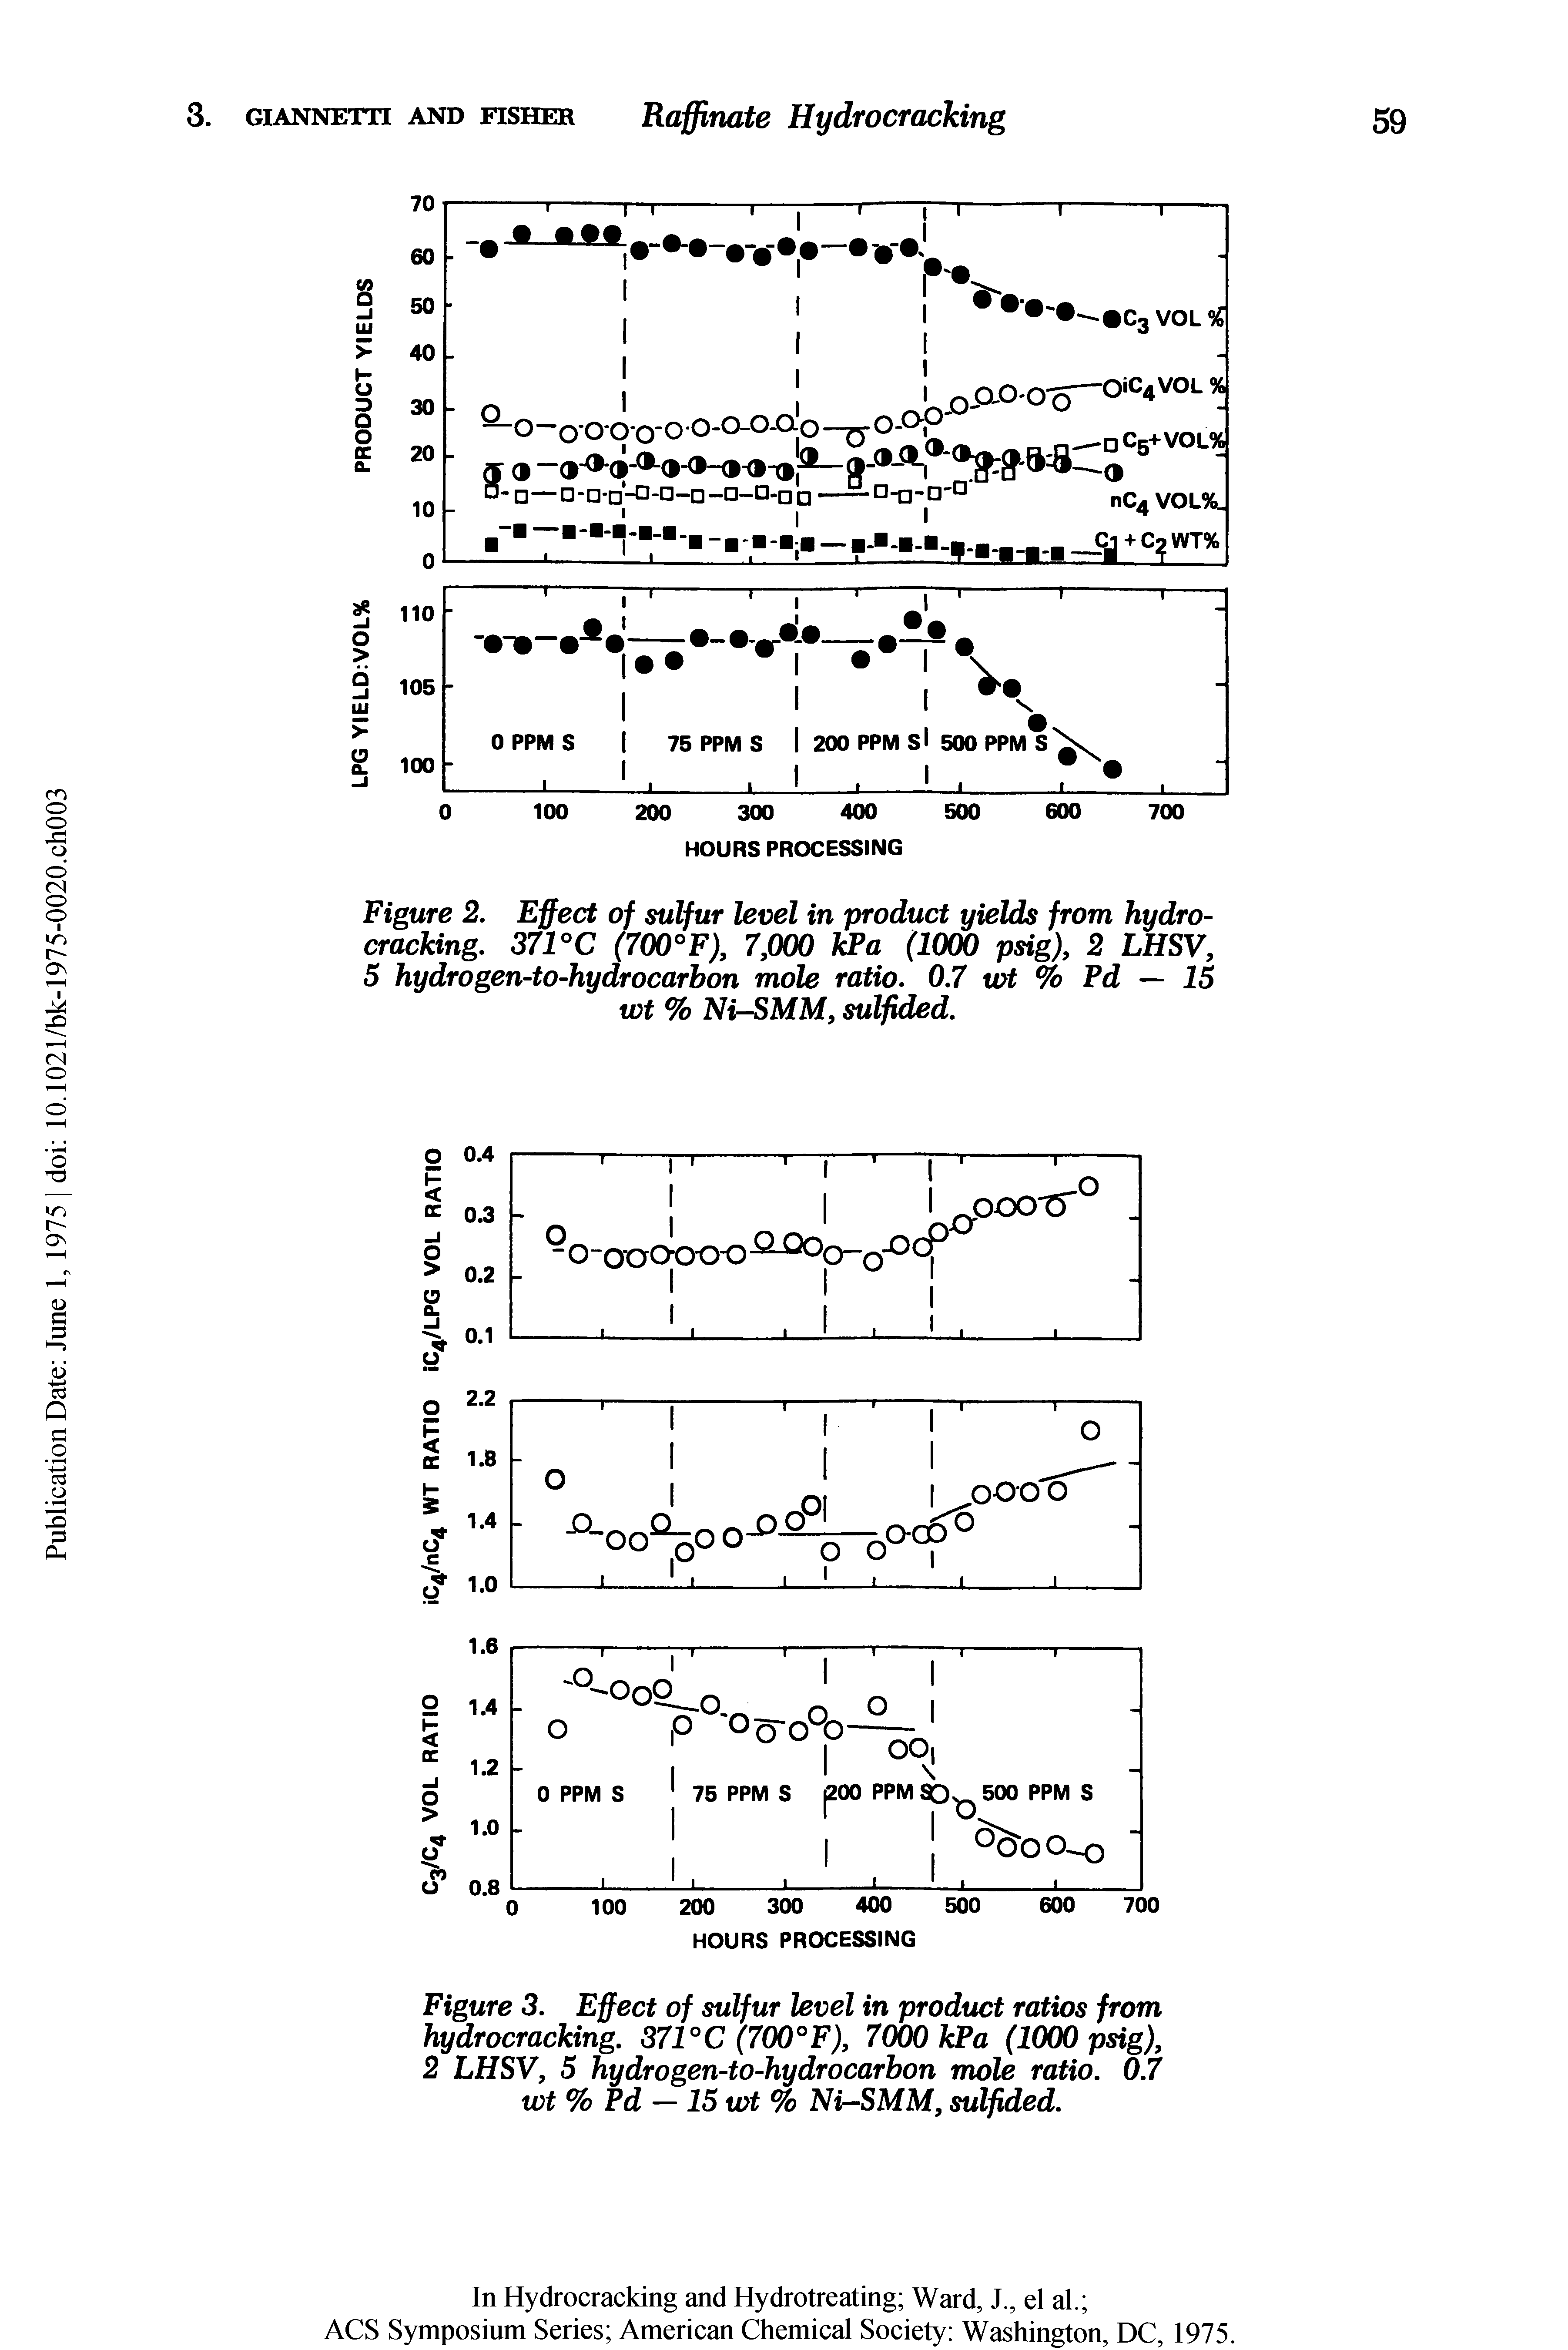 Figure 2. Effect of sulfur level in product yields from hydrocracking. 371°C (700° F), 7,000 kPa (1000 psig), 2 LHSV, 5 hydrogen-to-hydrocarbon mole ratio. 0.7 wt % Pd — 15 wt % Nir-SMM, sulfided.